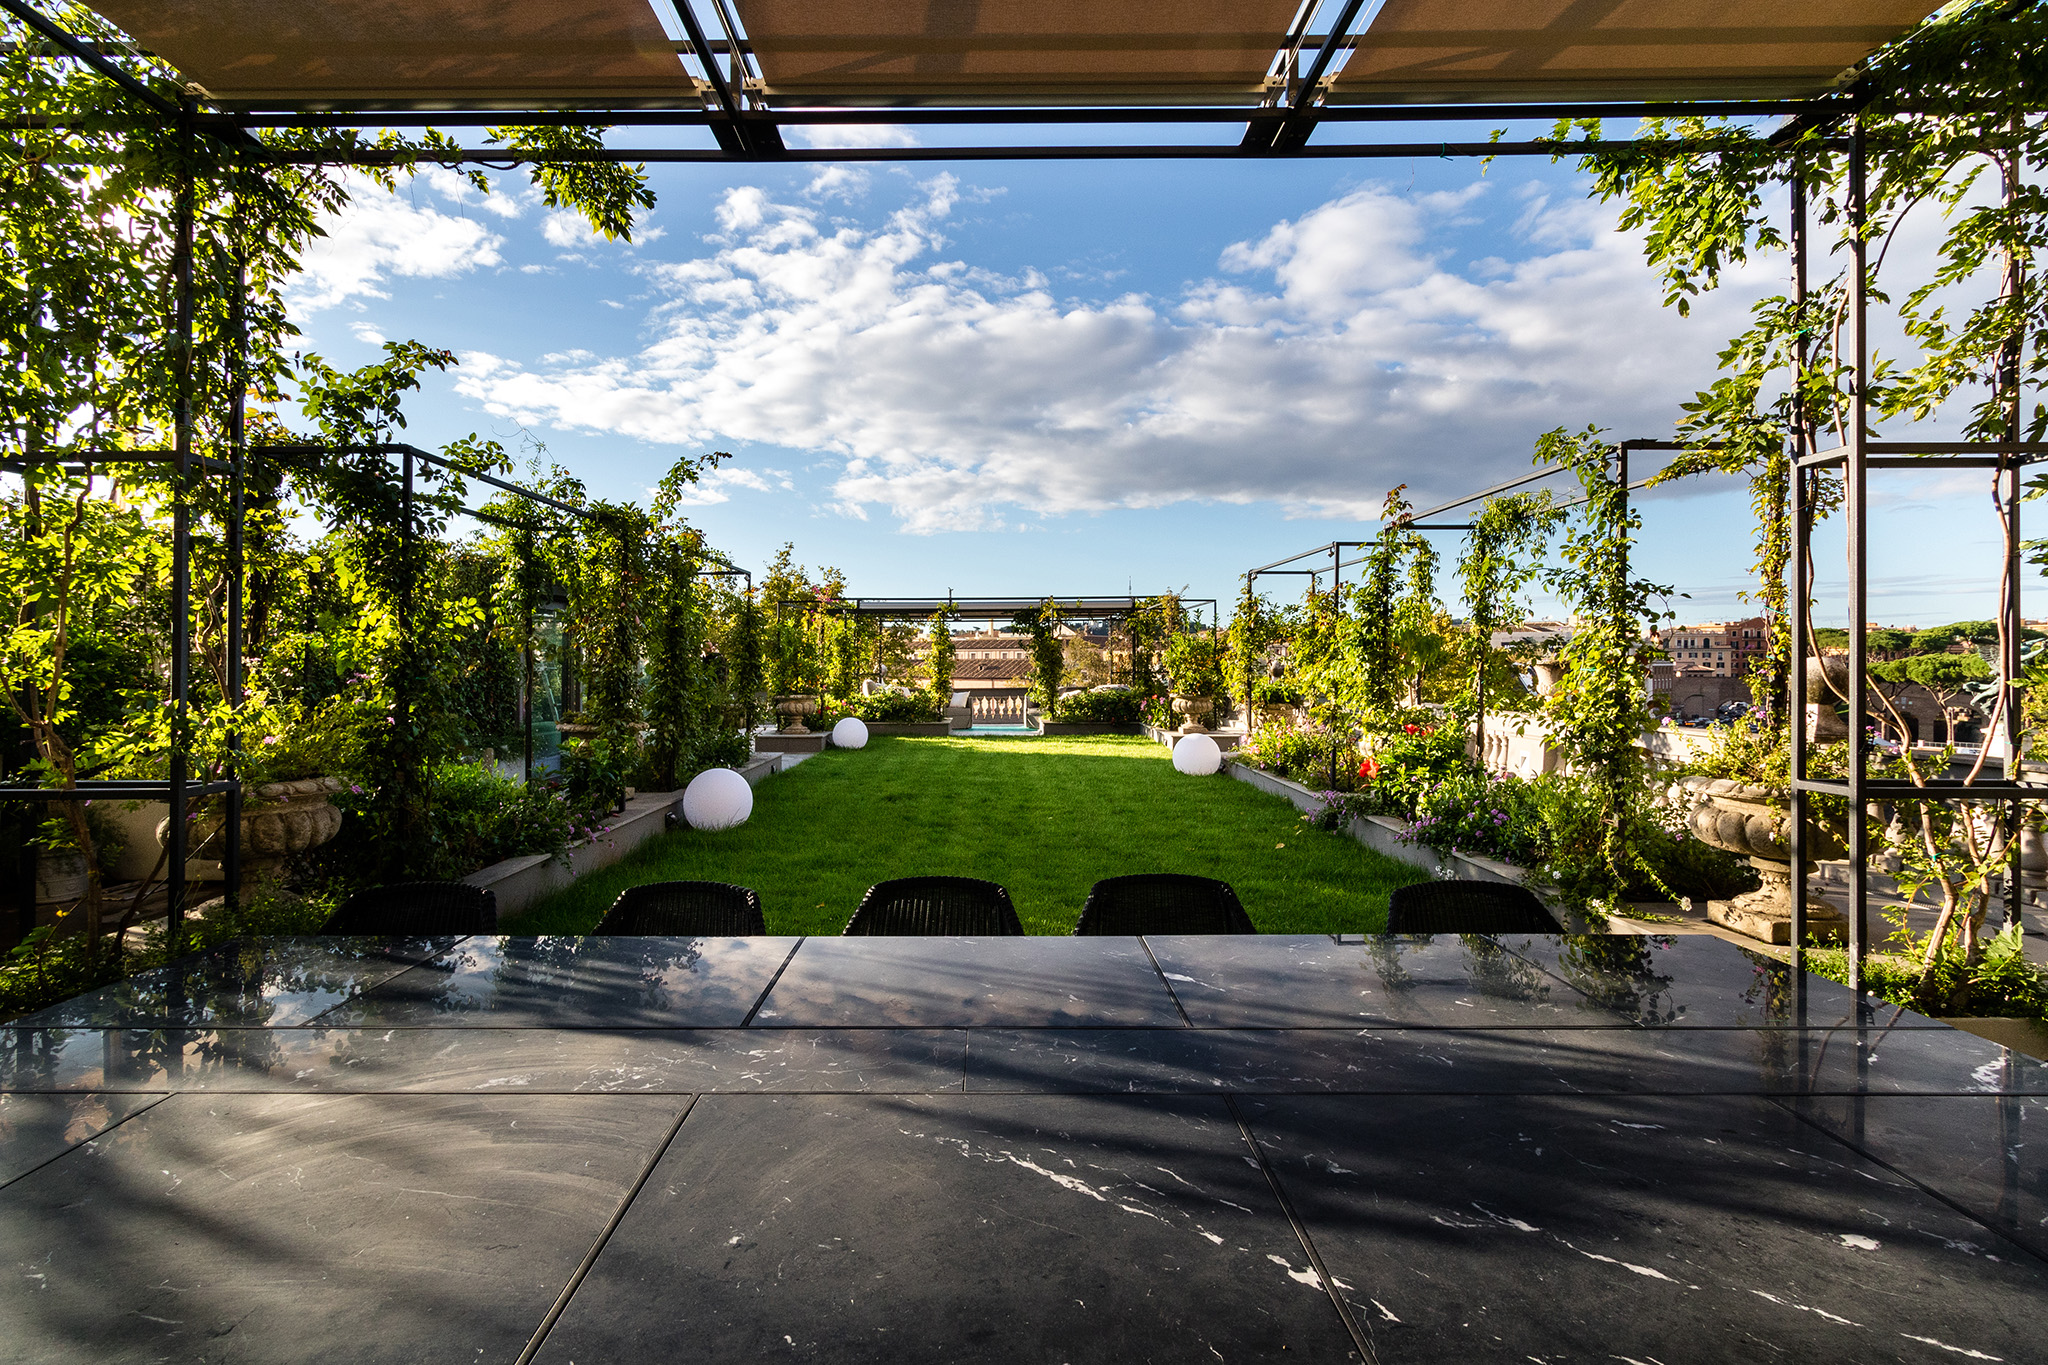 Bevilacqua Architects – Roof Garden at the heart of Rome